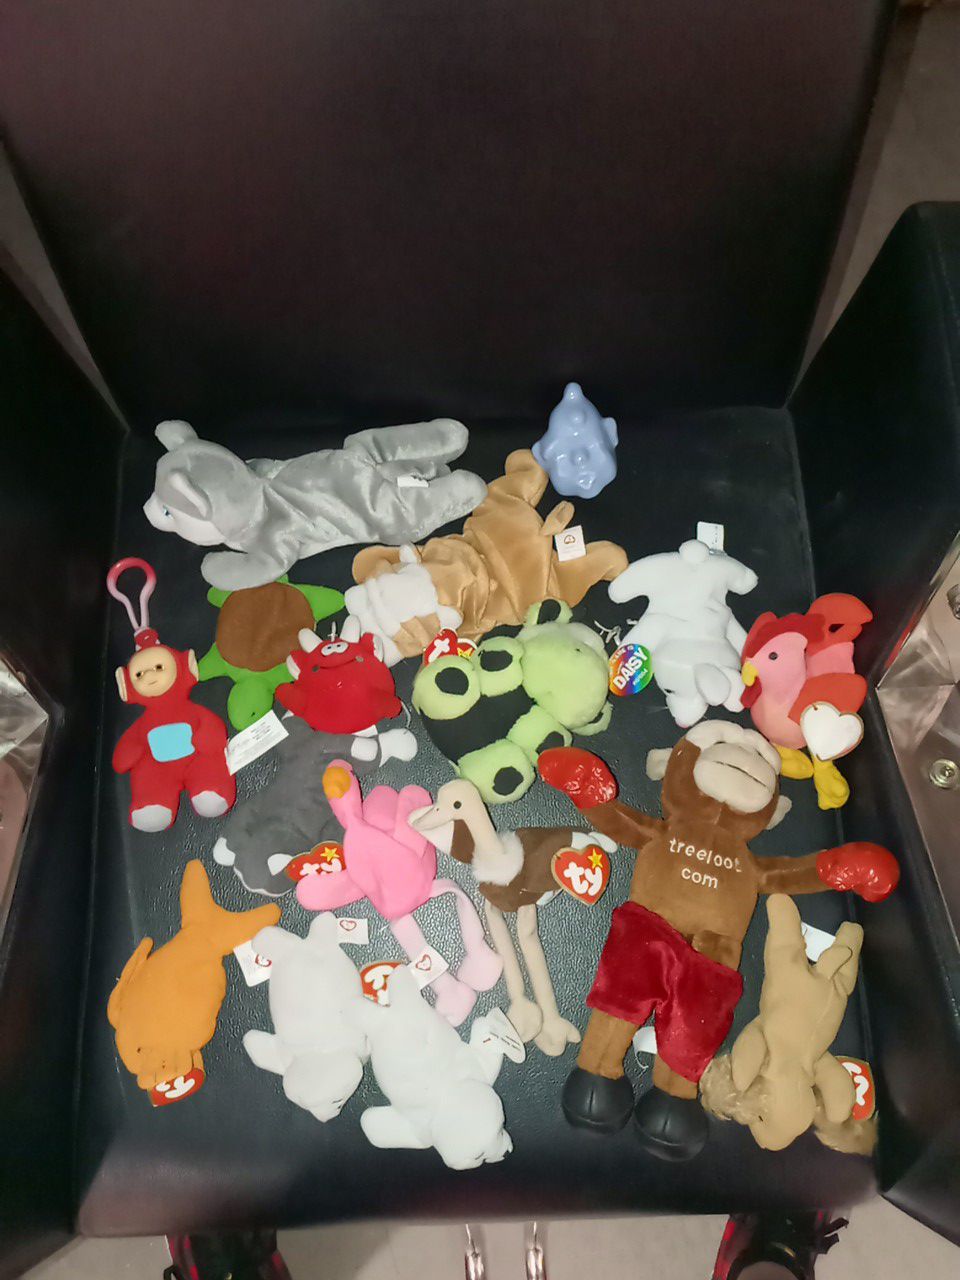 Beanie baby's collectors edition with tags